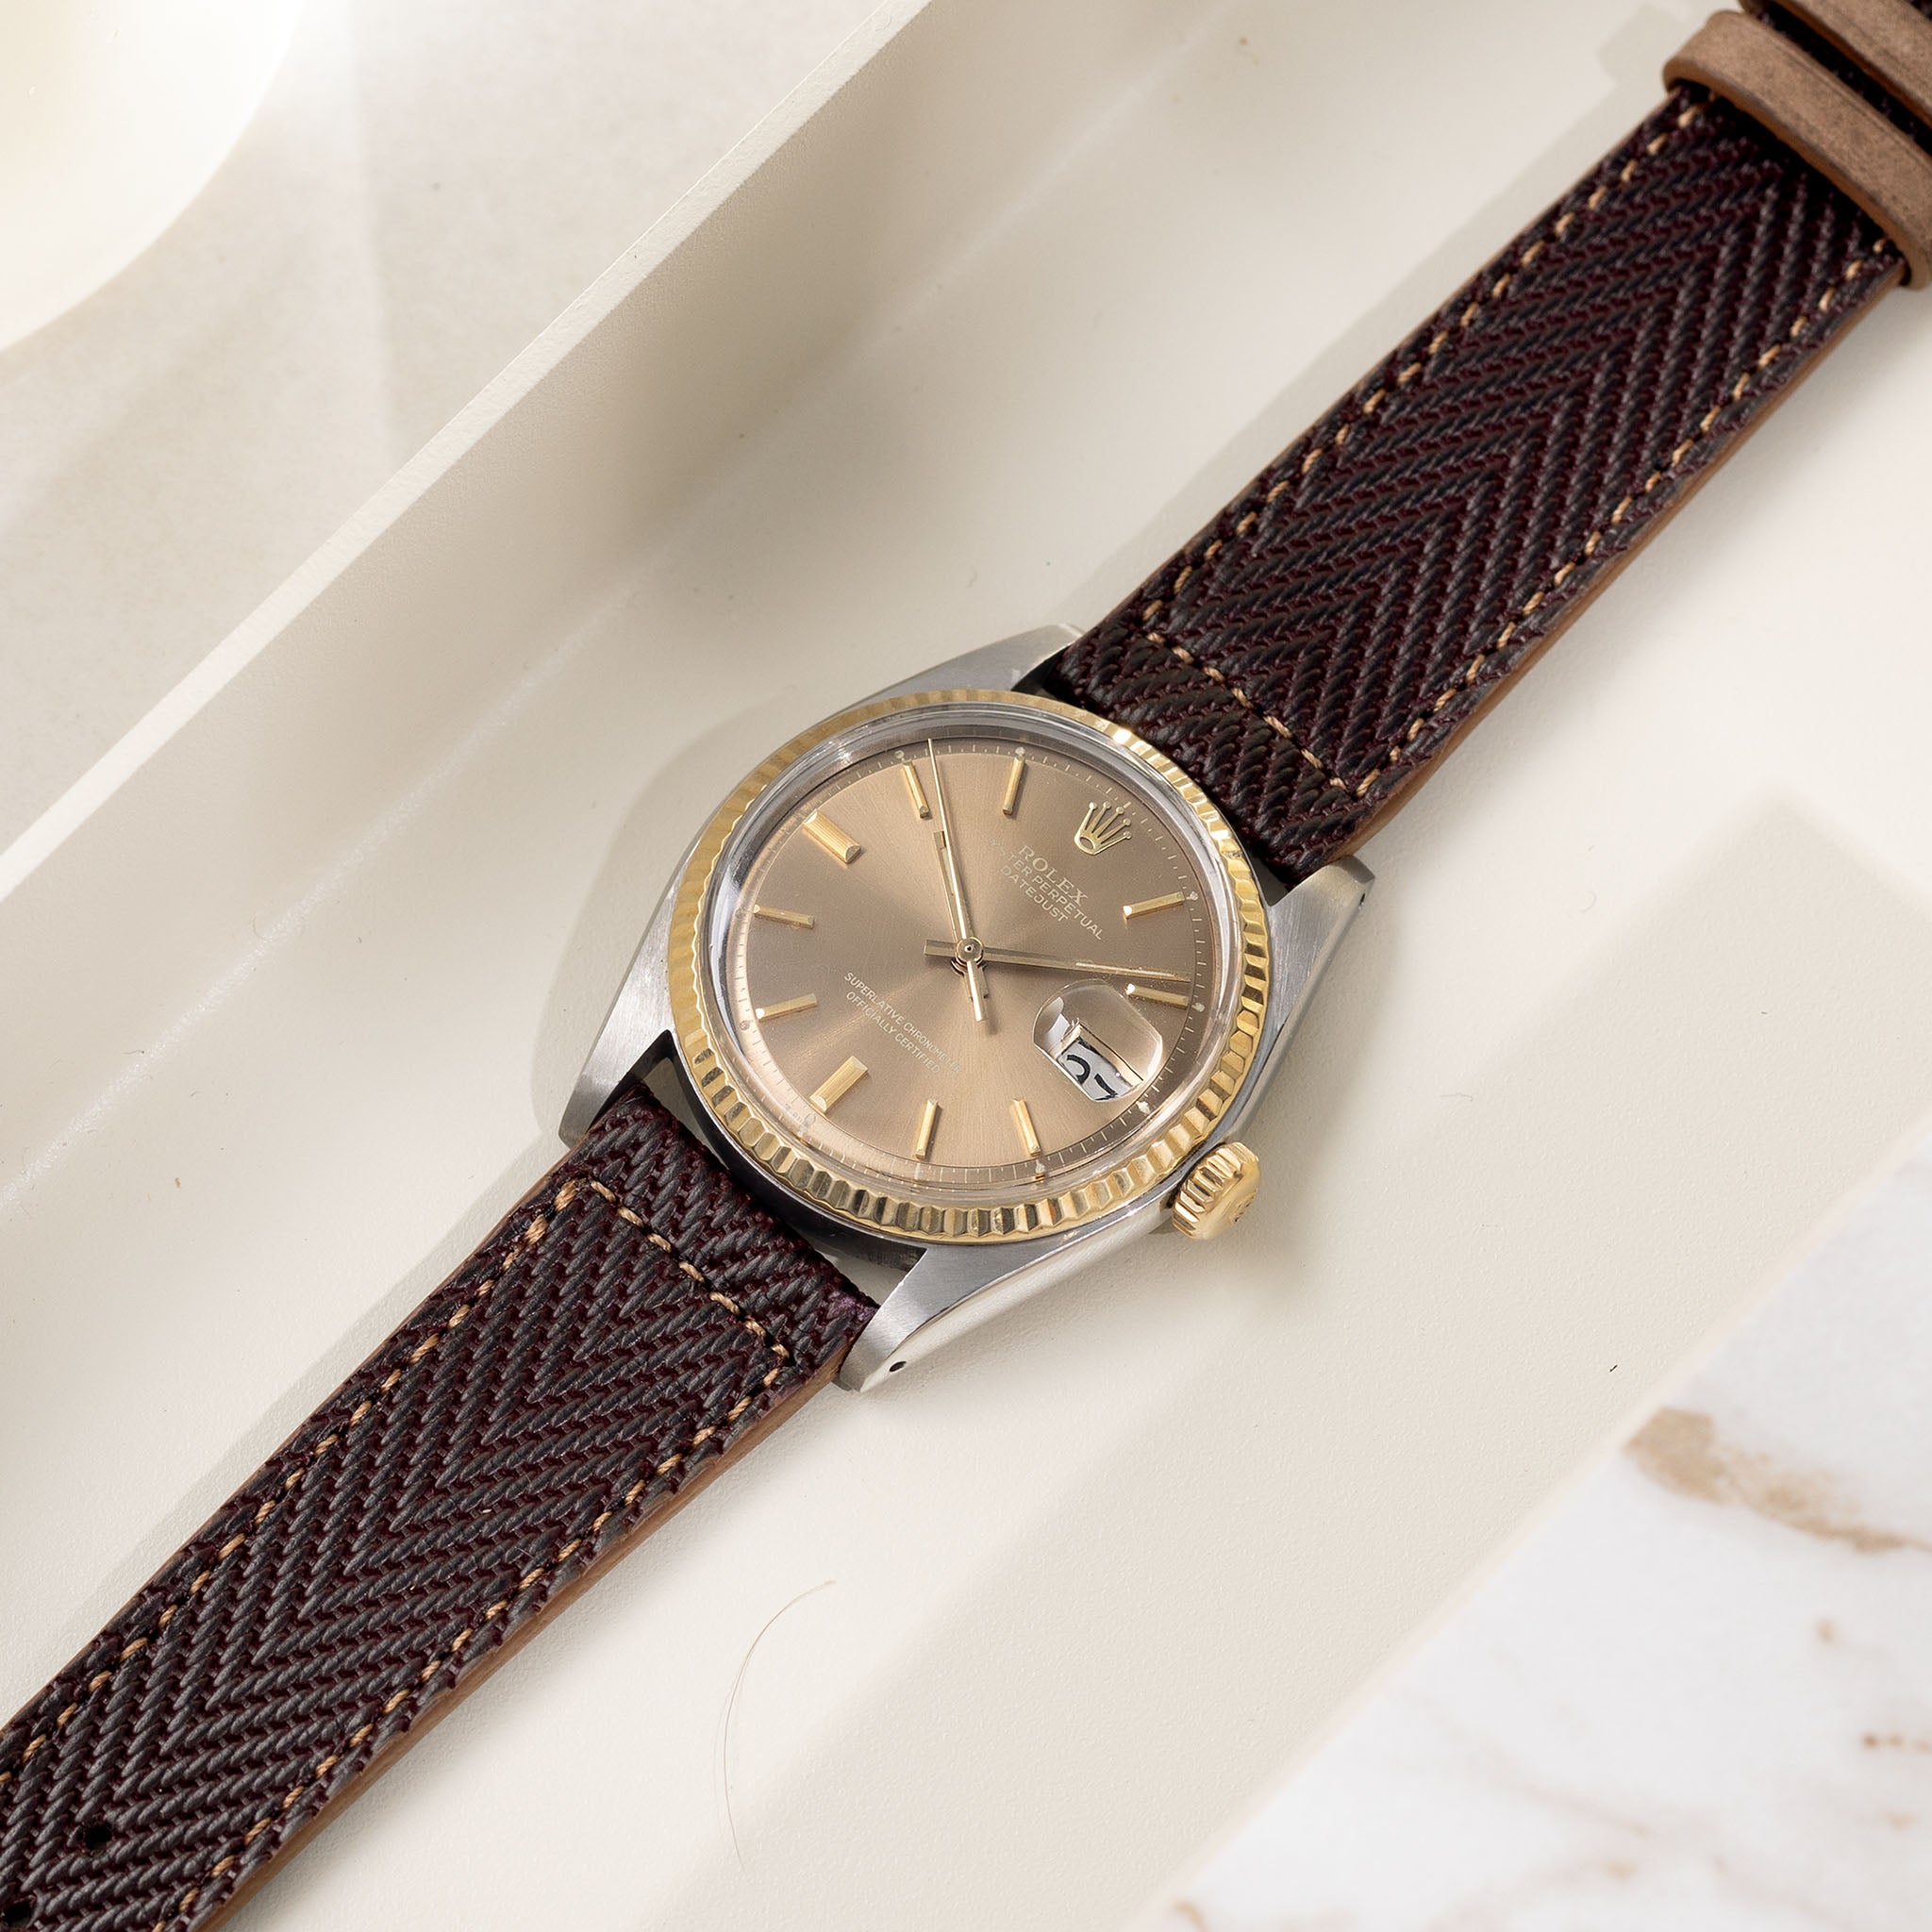 The Limited Edition ManhattanRollie Leather Watch Strap – Charity Edition Rolex 1601 Datejust